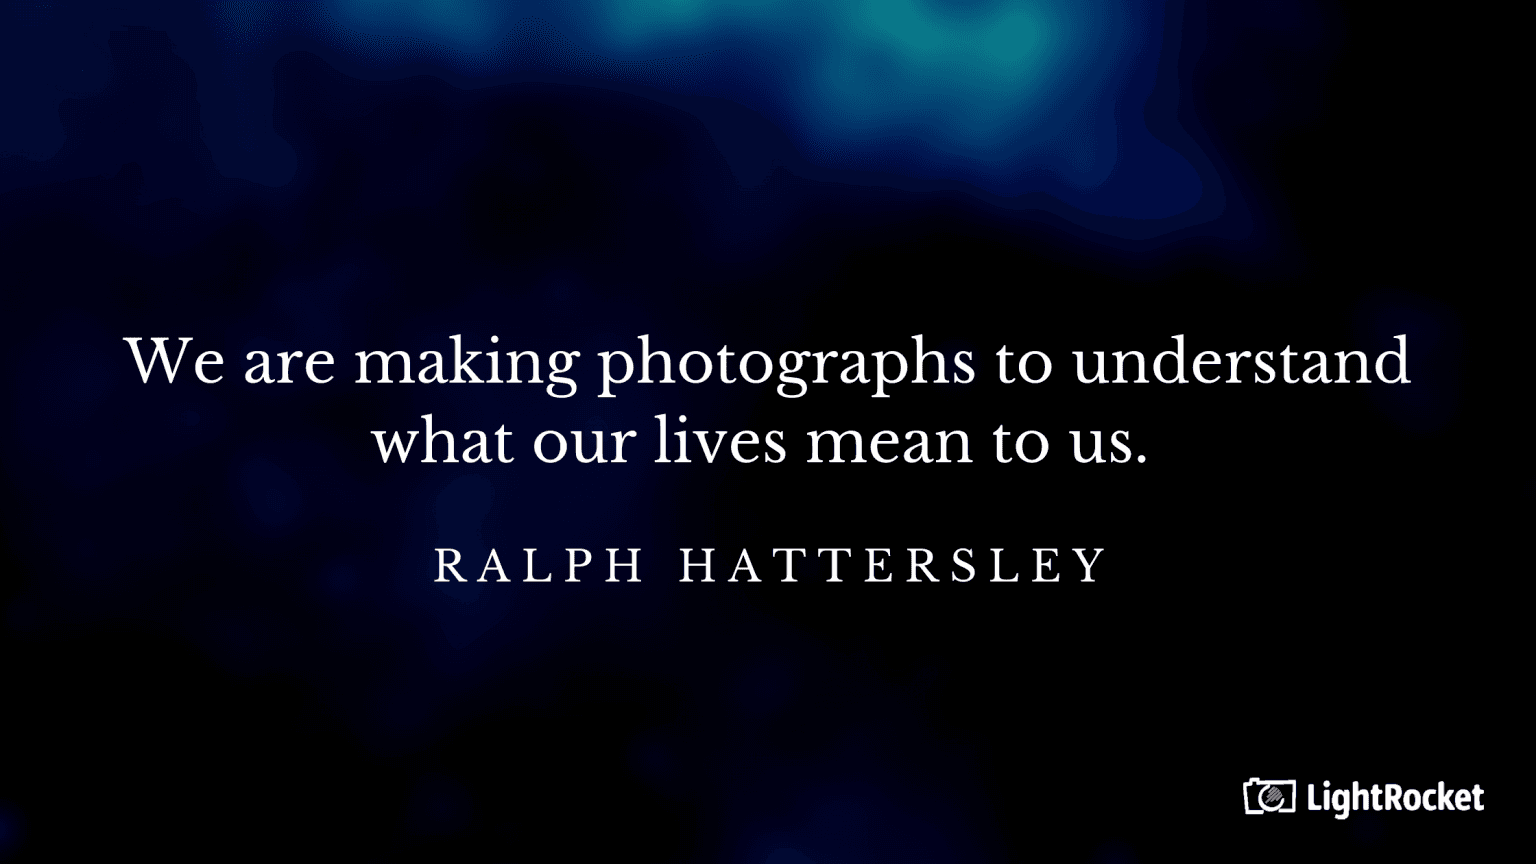 “We are making photographs to understand what our lives mean to us.” – Ralph Hattersley